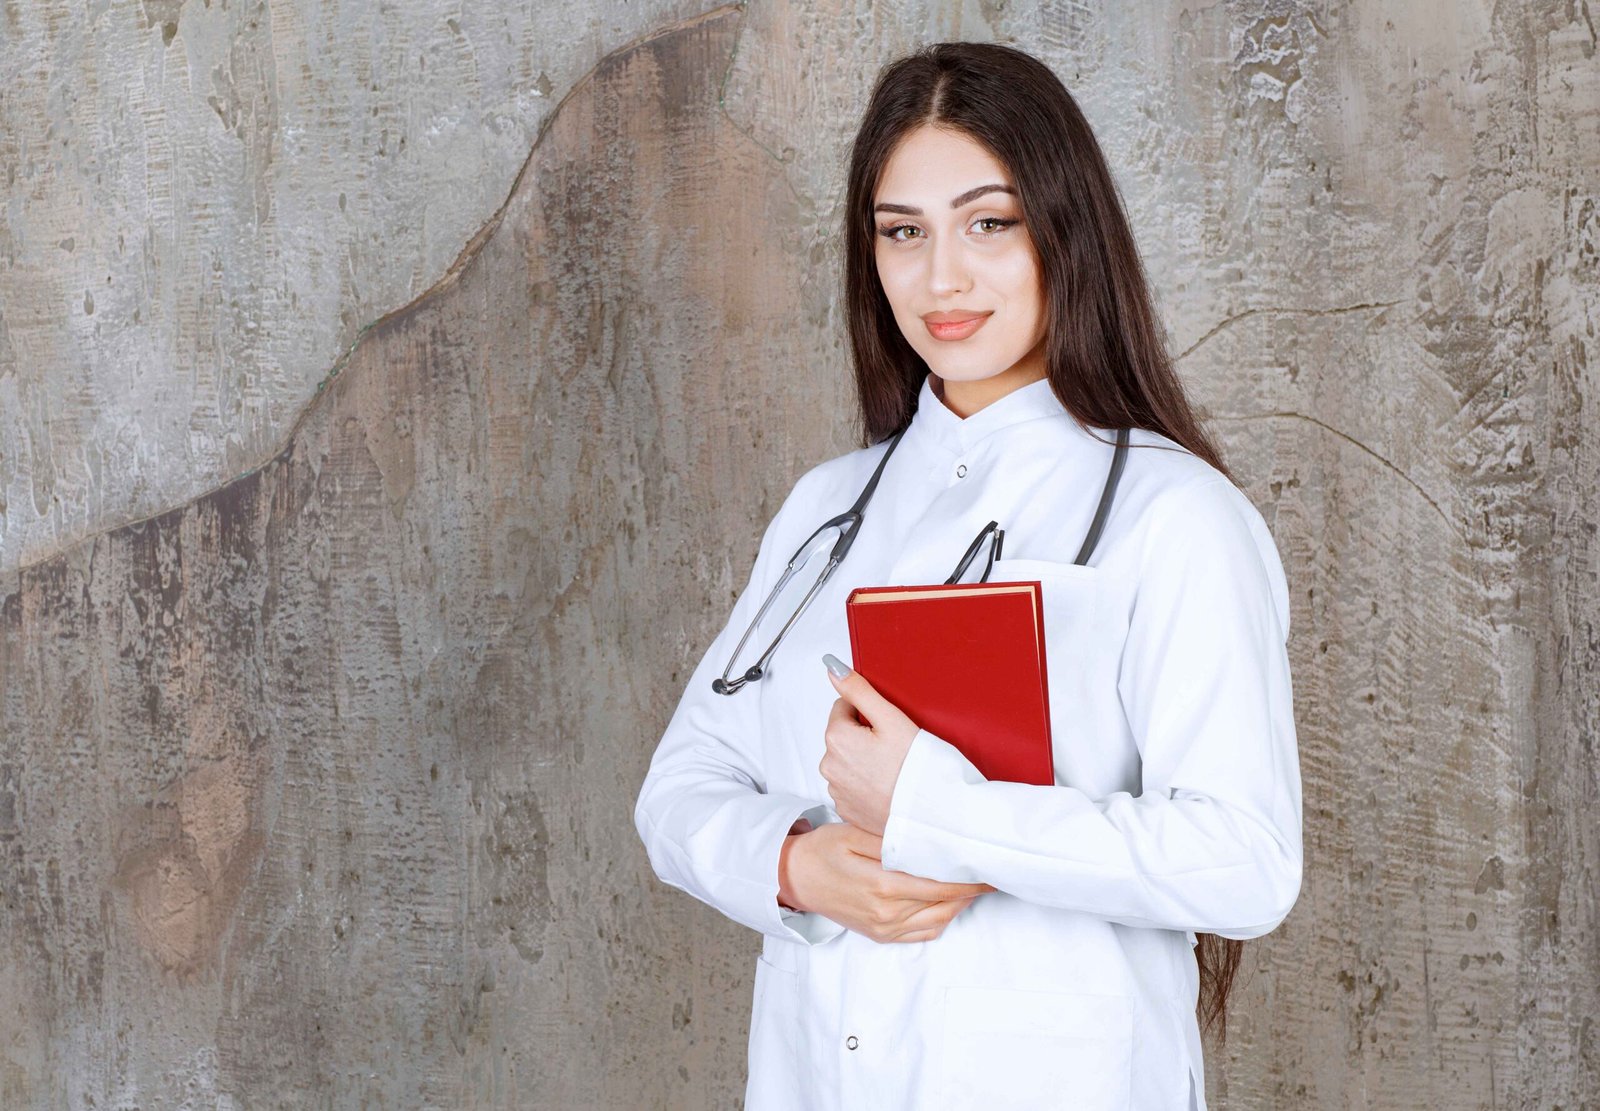 MBBS in Russia with Low NEET Score